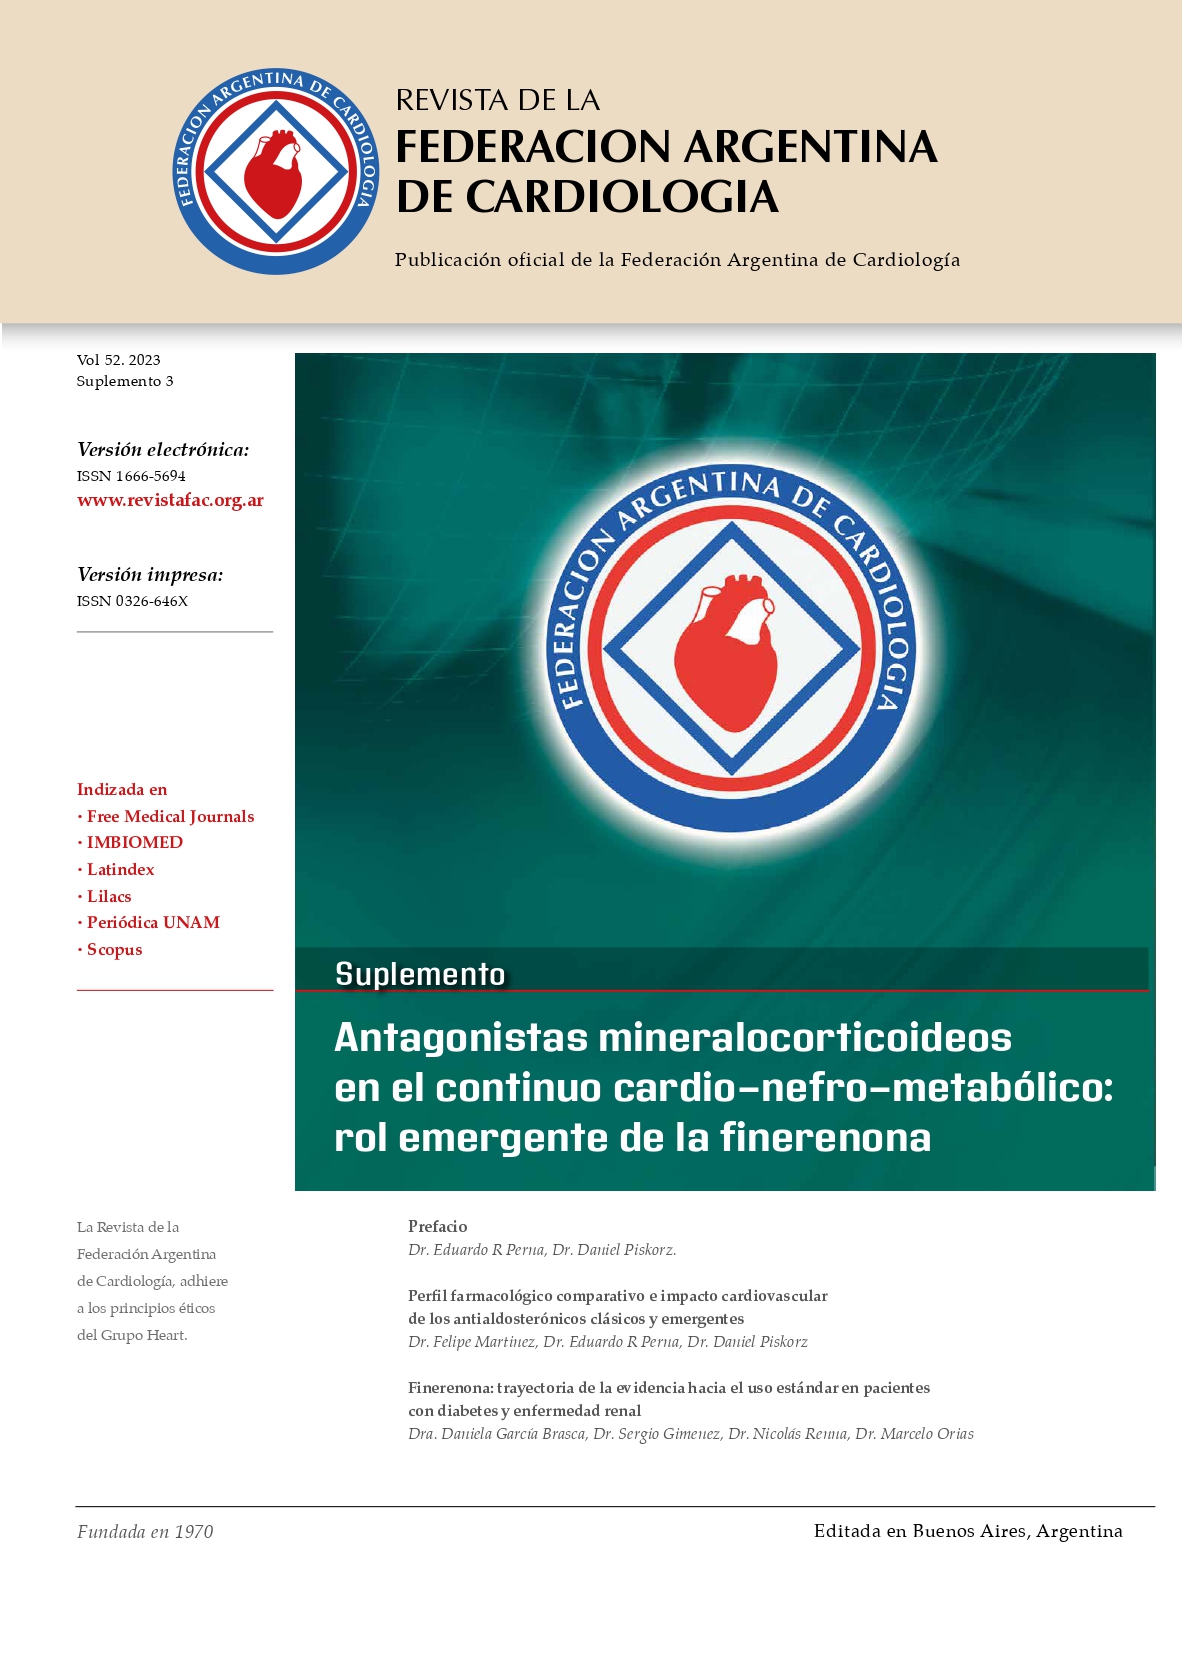 					View Vol. 52 (2023): Supplement: Mineralocorticoid antagonists in the cardio-renal-metabolic continuum: emerging role of finerenone
				